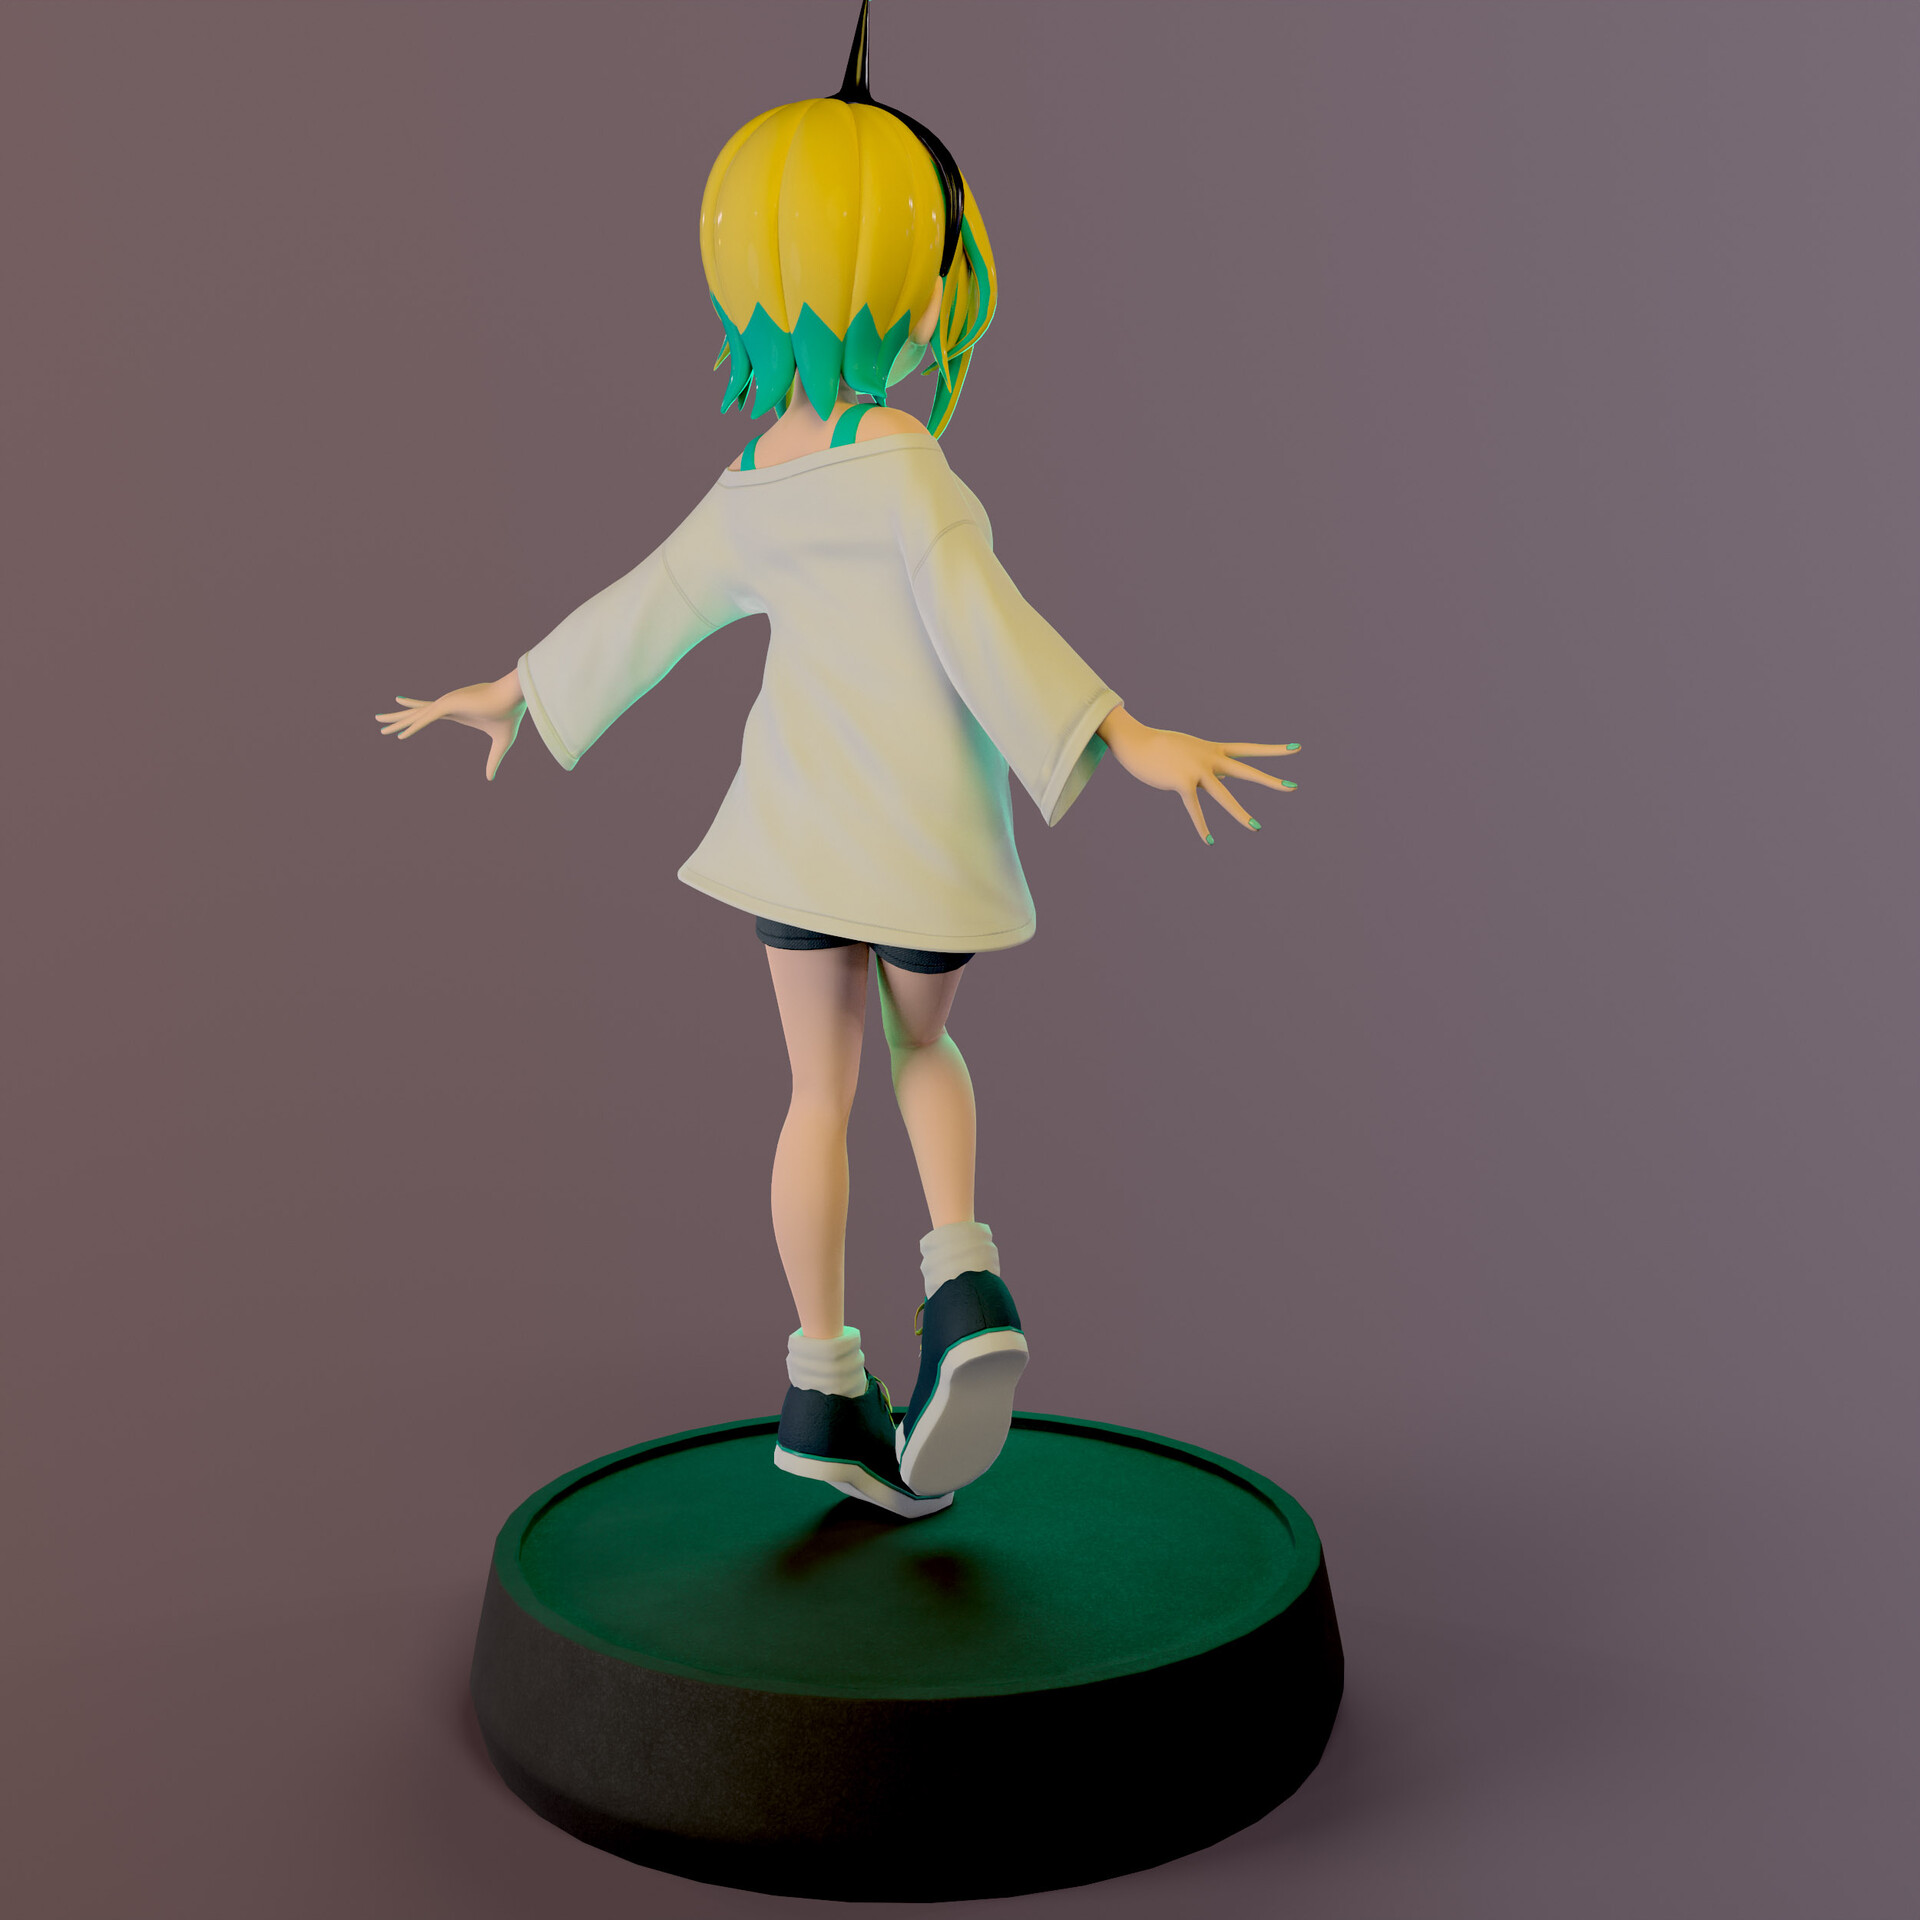 Anime Character - Amano Pikamee 3D model